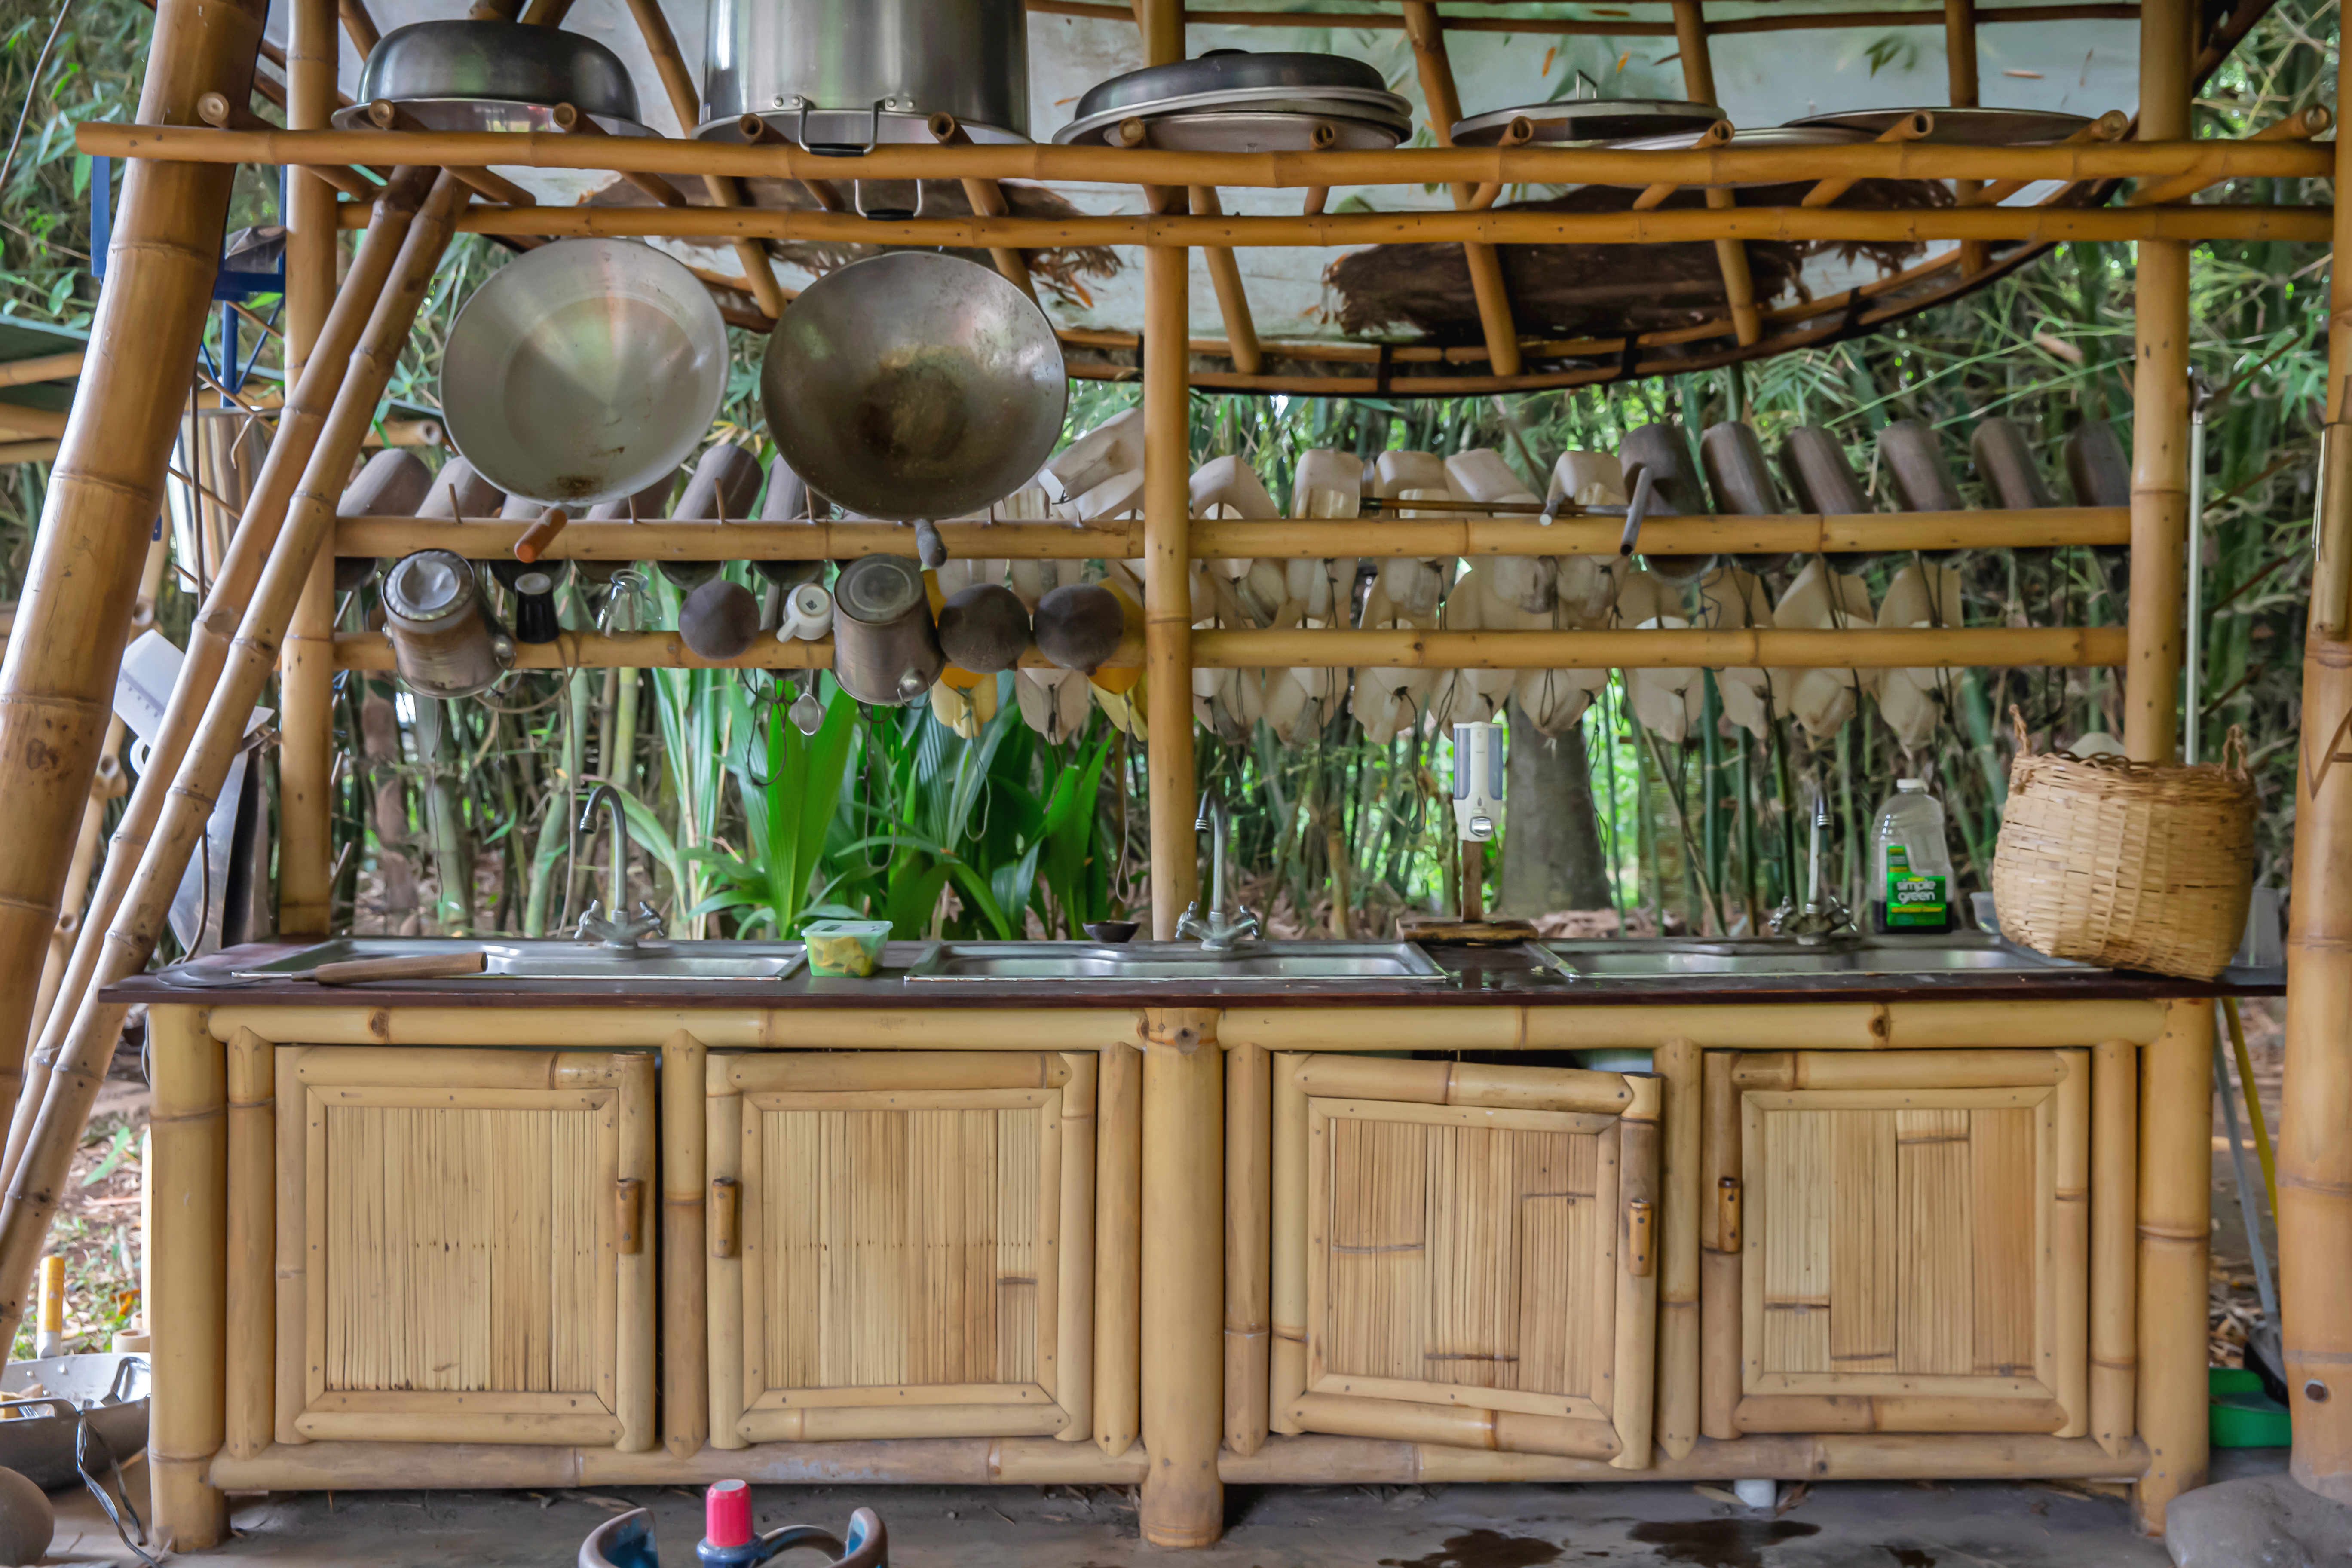 Tiki-style rattan cabinets in an outdoor kitchen 